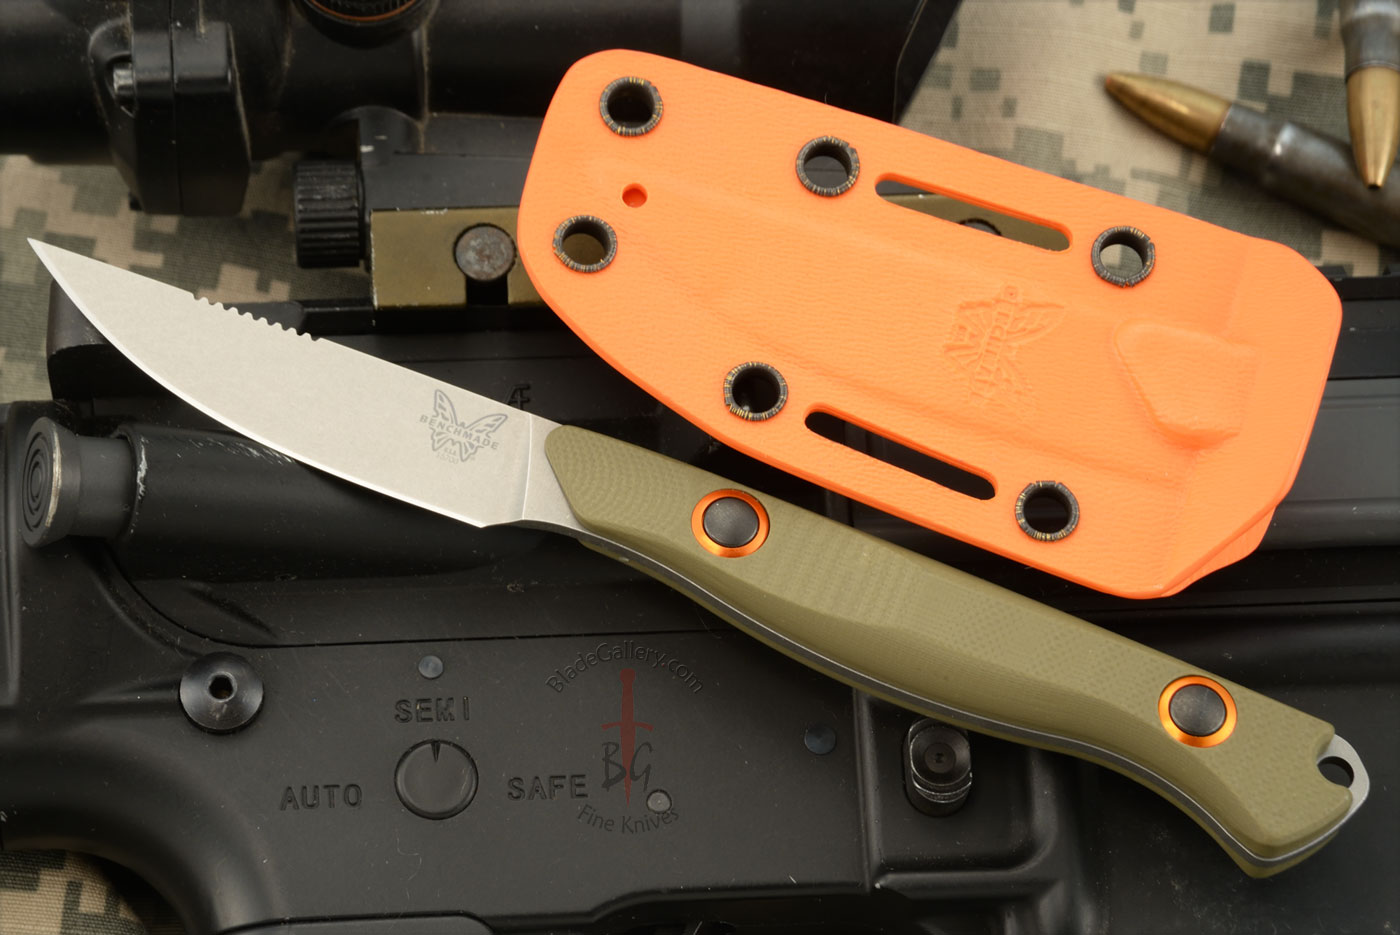 Flyway (15700-01) with OD Green G10 - CPM-S90V